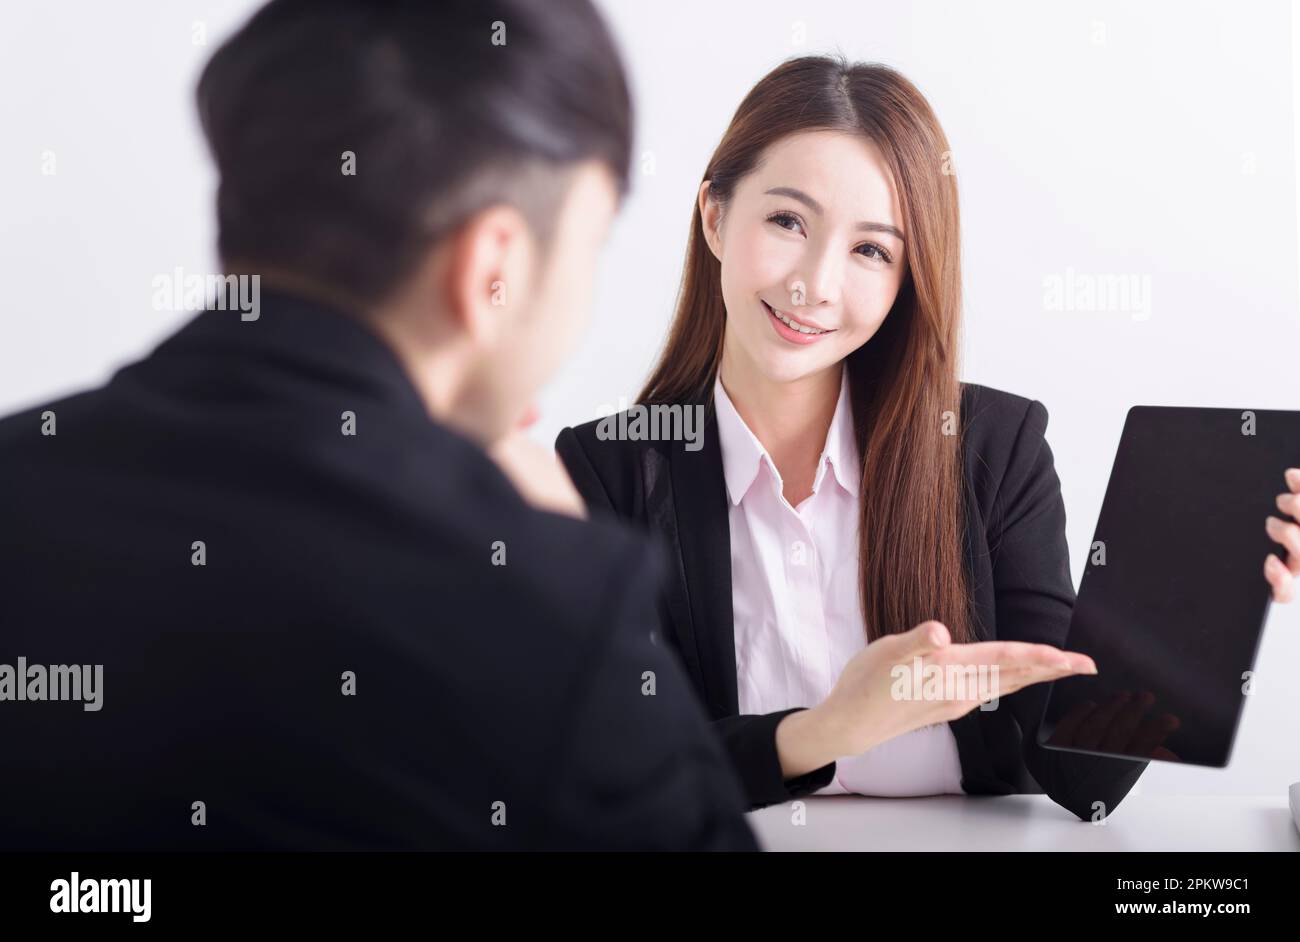 Business women are introducing or consulting businesses to male employees with mobile tablet Stock Photo